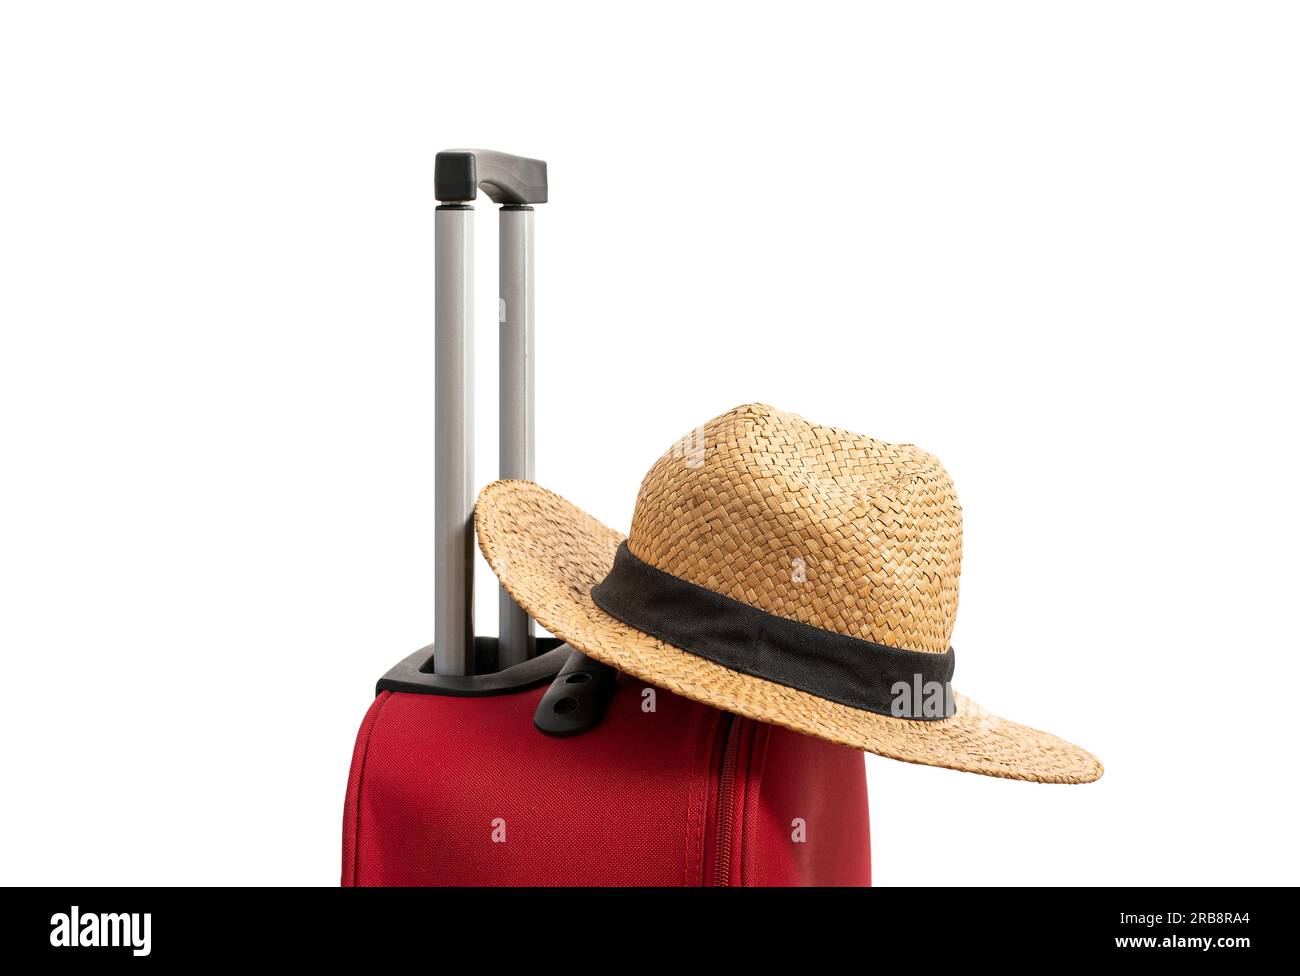 For travel and vacations purposes, a simple modern suitcase in red color is nicely isolated on a pure white background with a straw hat. Stock Photo